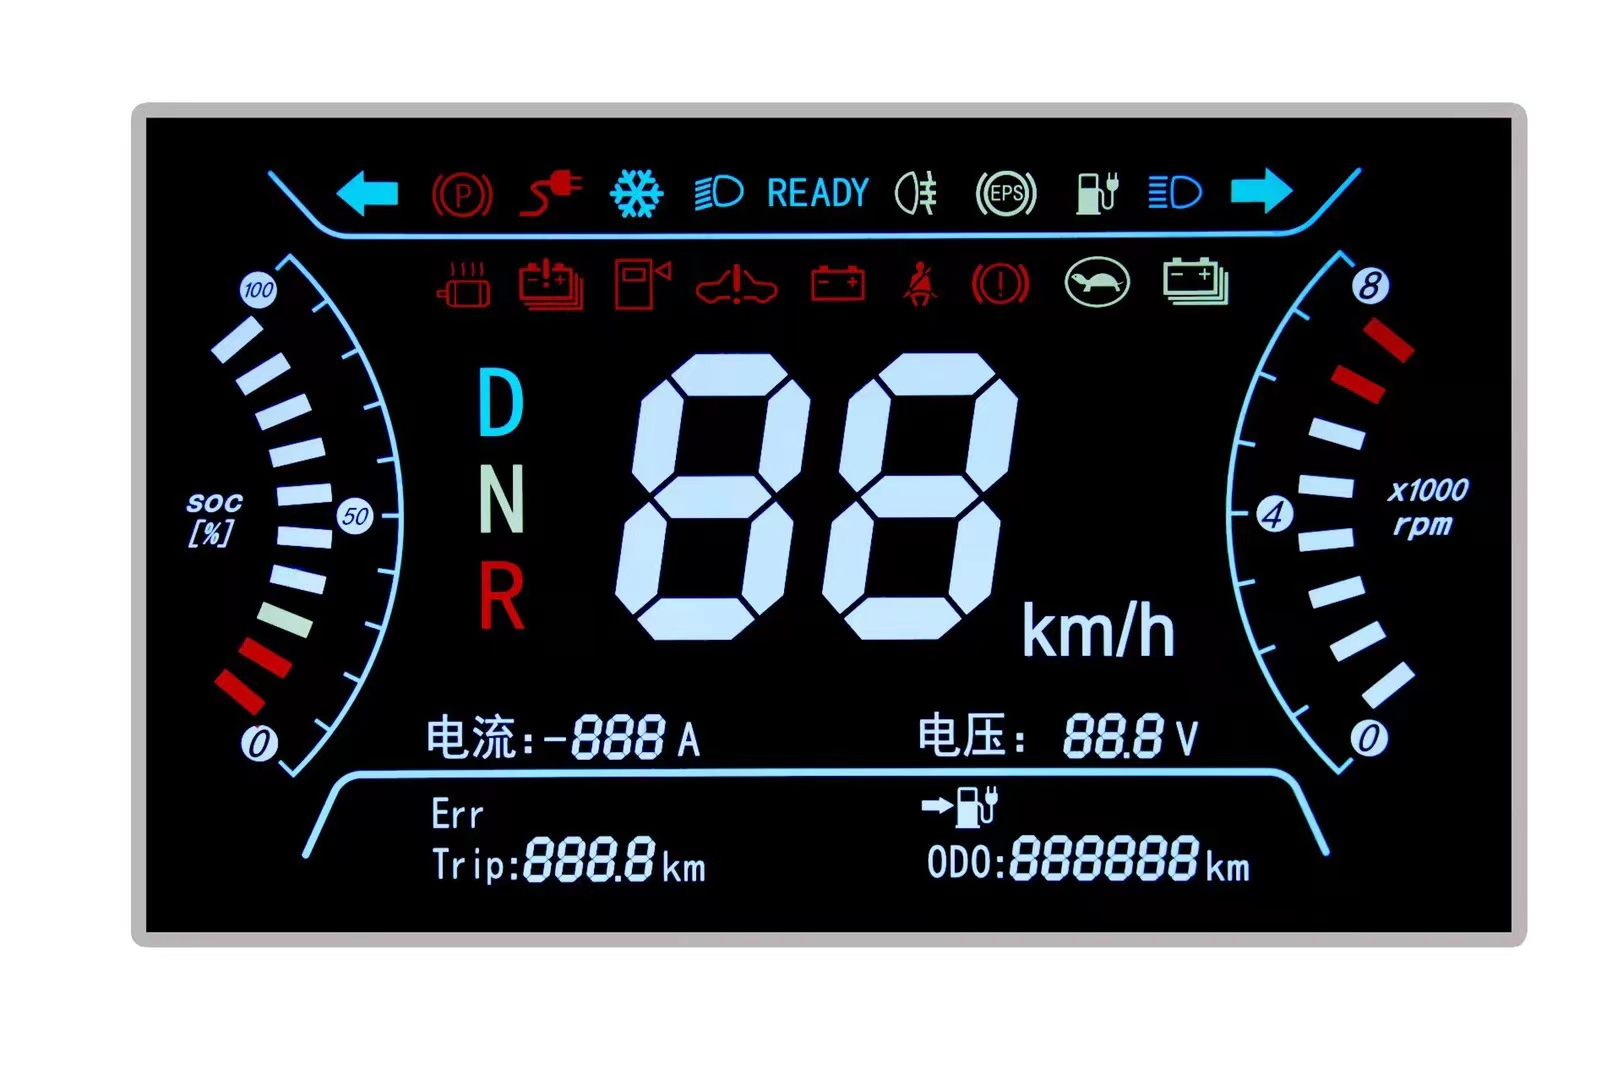 Instrument Cluster LCD Display, Sunlight Viewable Monitor, Dash Board LCD, Energy Monitoring Dashboard